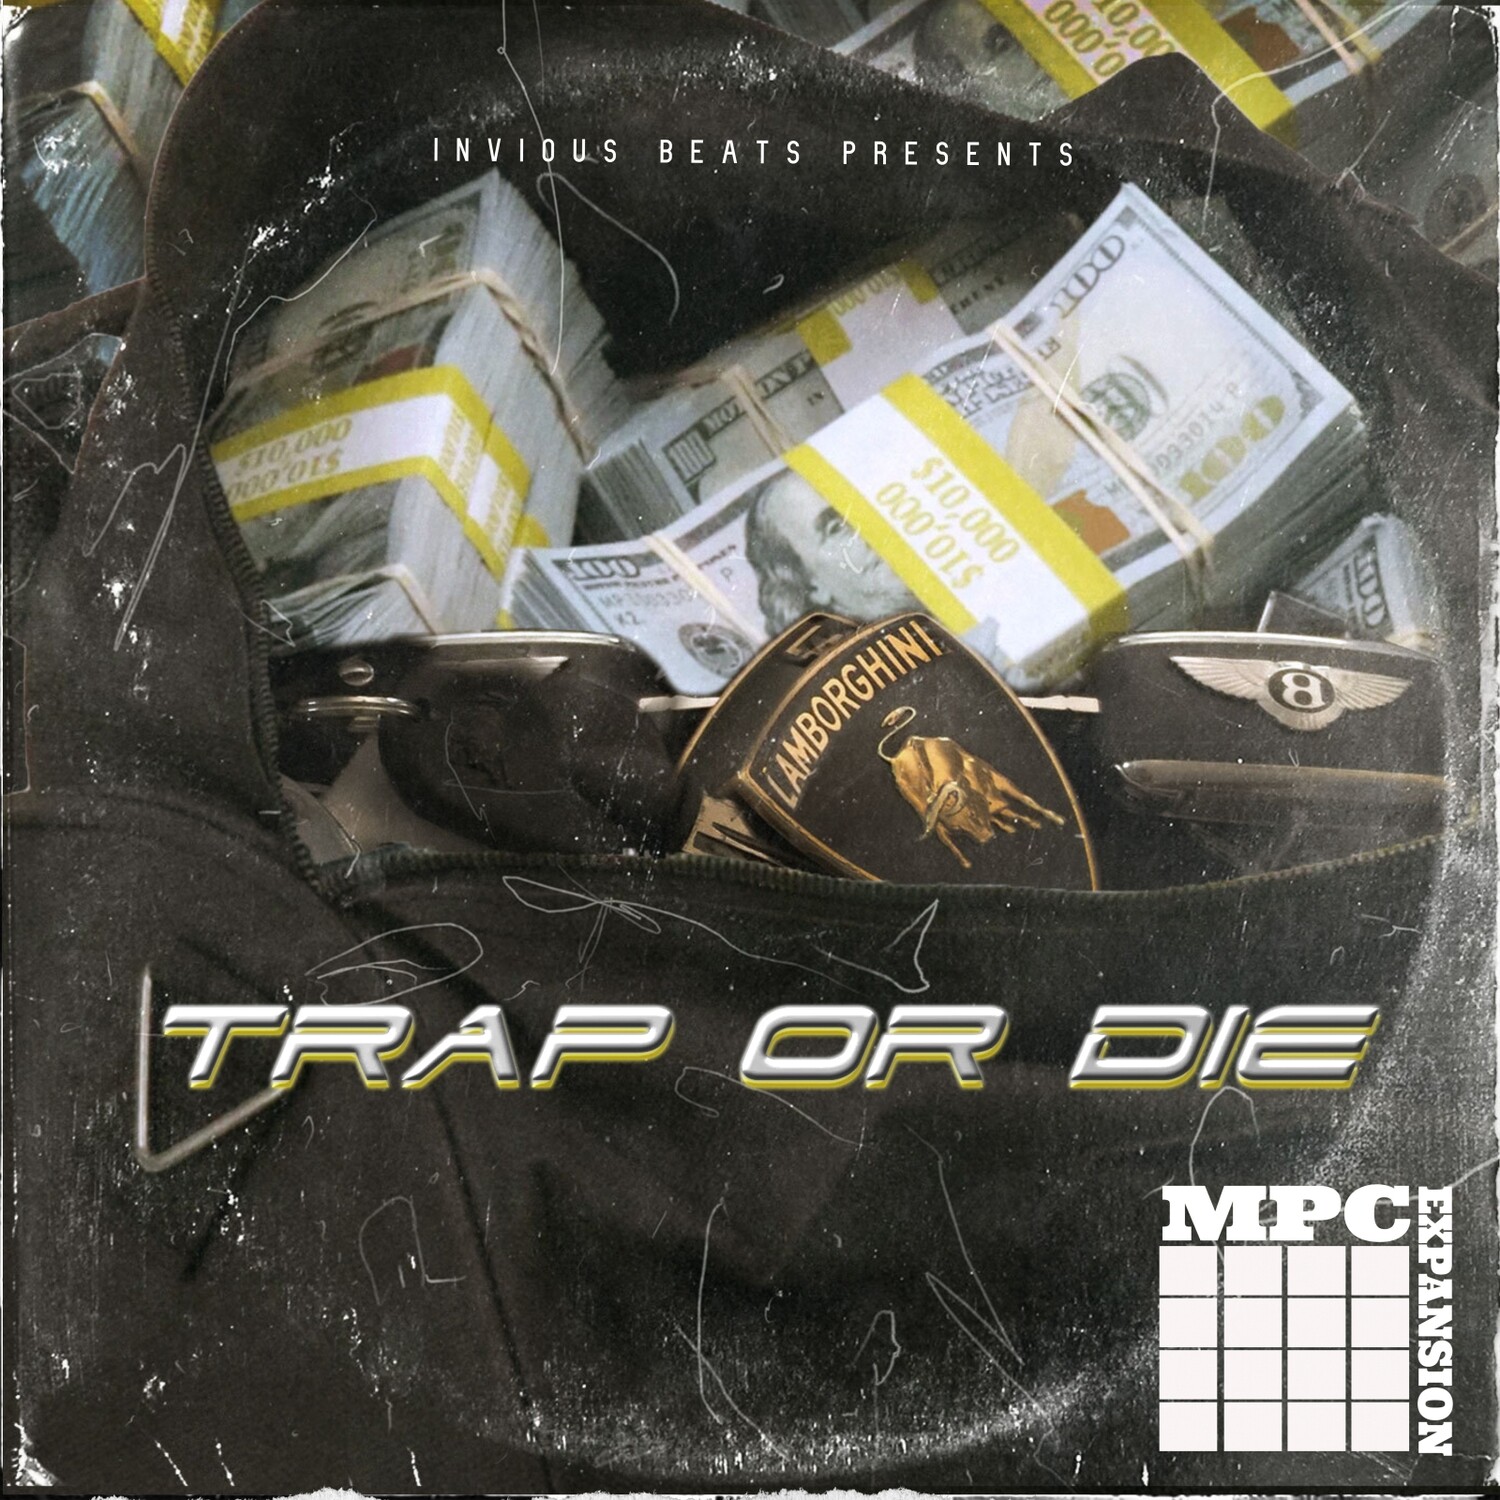 MPC EXPANSION 'TRAP OR DIE' by INVIOUS